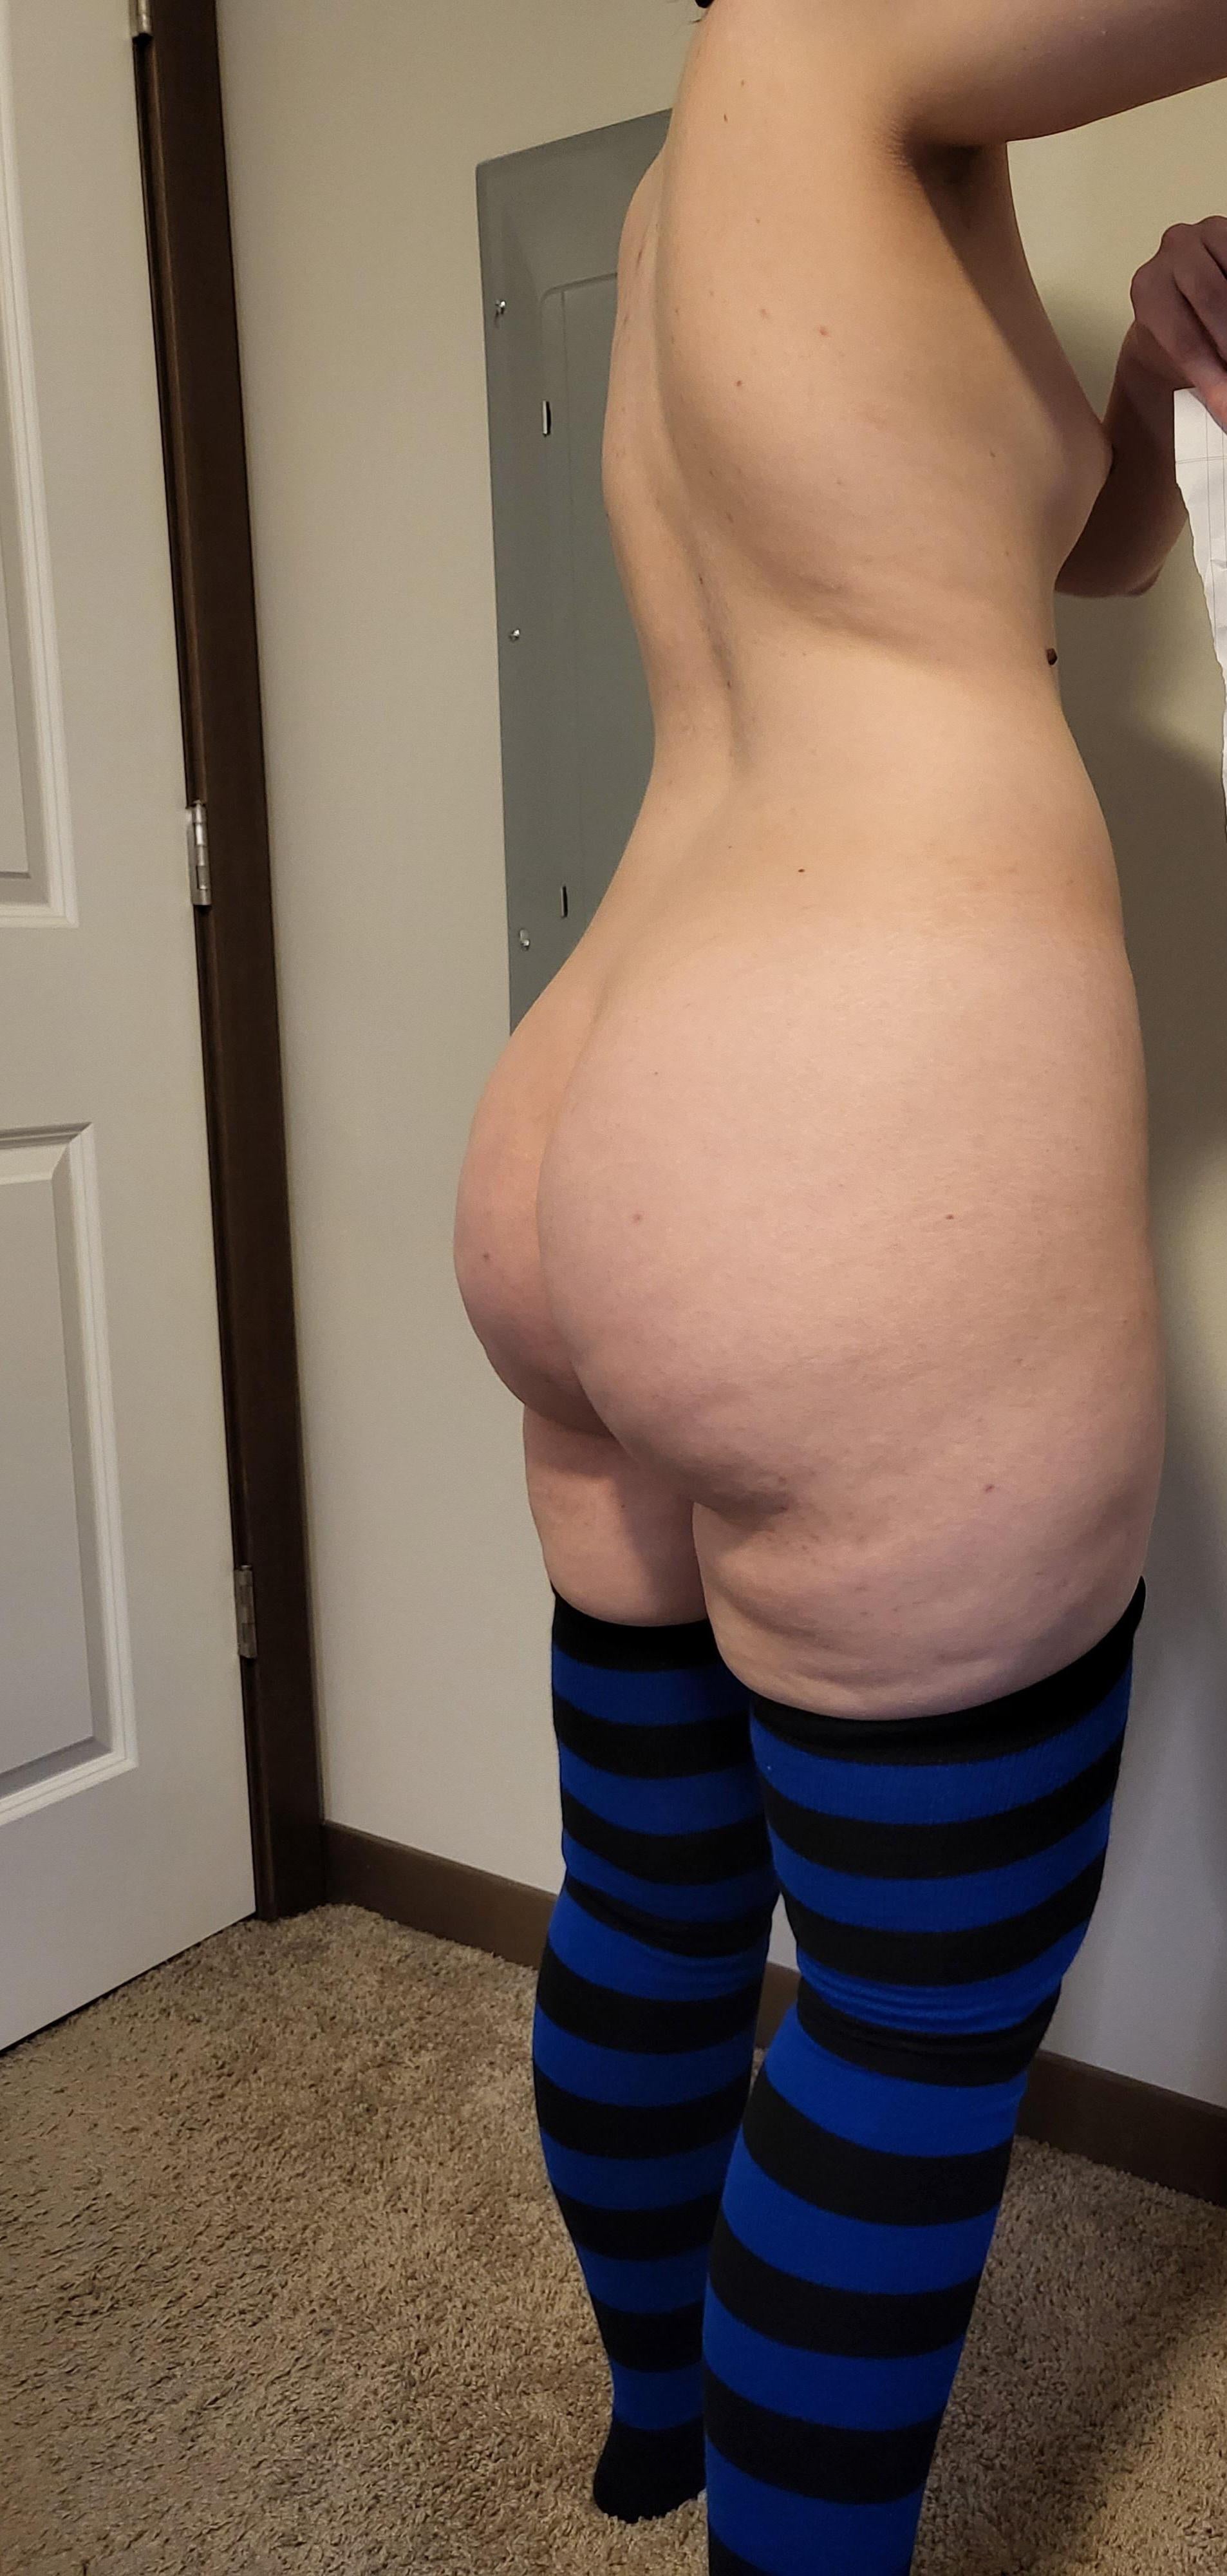 PAWG The socks really bring out the best in my